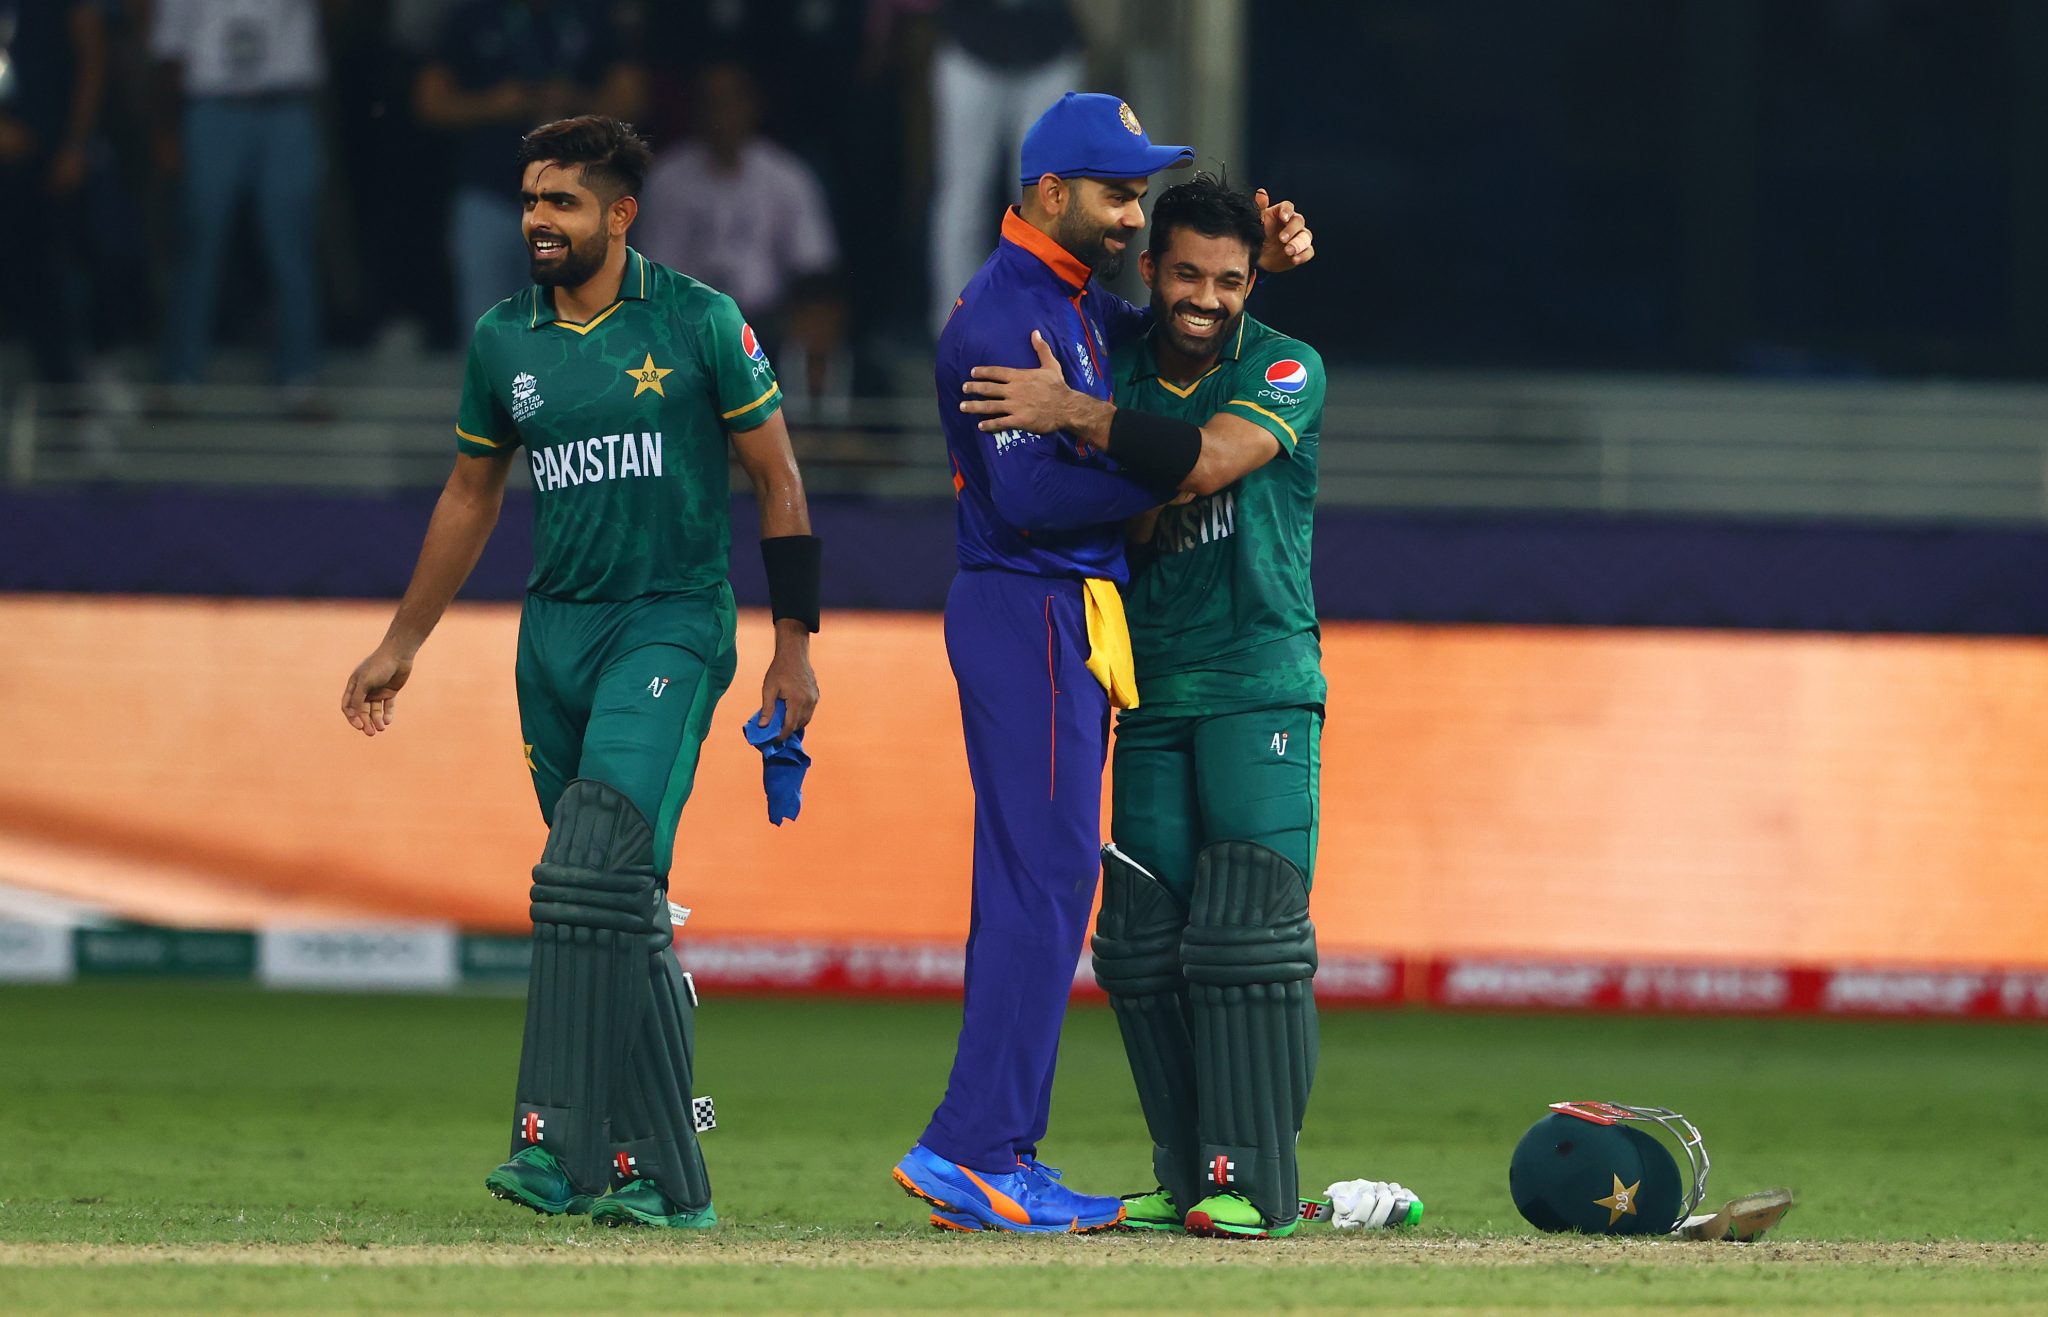 YuppTV acquires Asia Cup 2022 rights Advanced Television